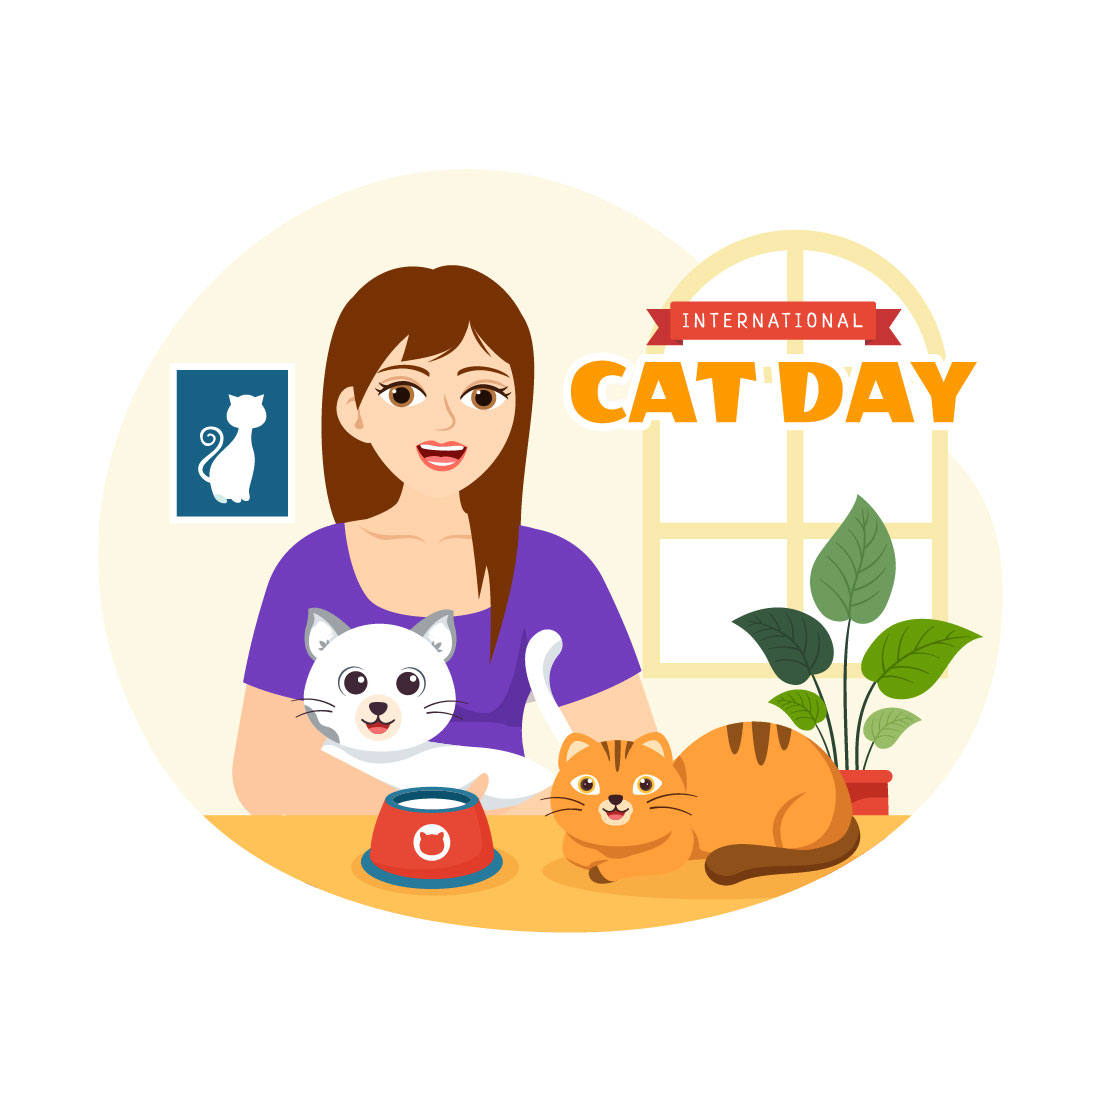 16 International Cat Day Illustration preview image.